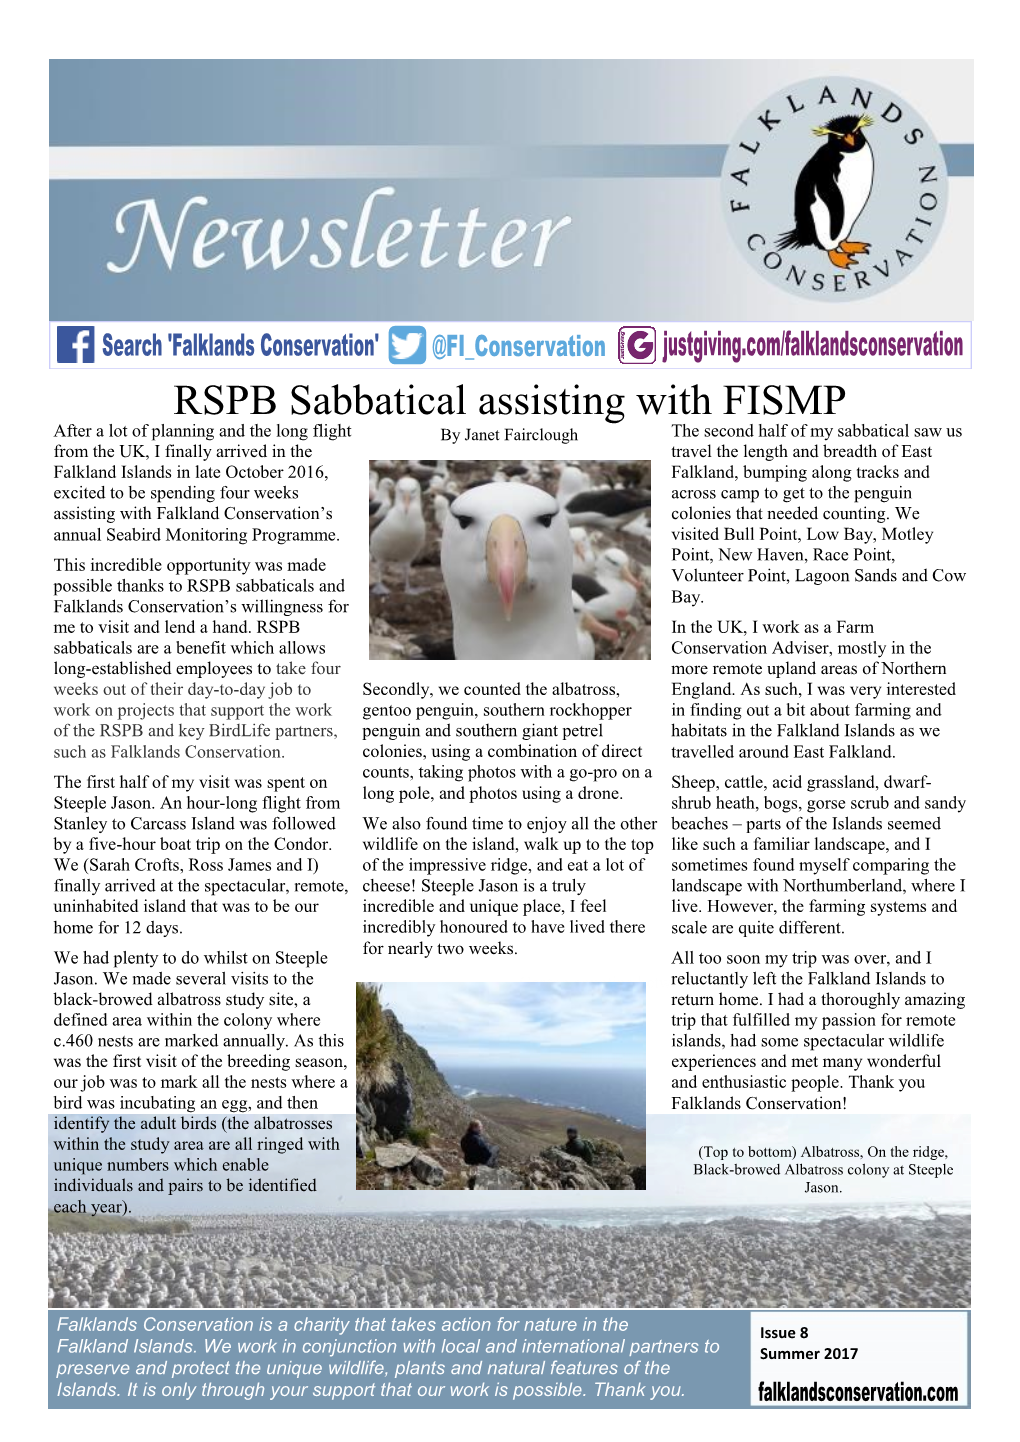 RSPB Sabbatical Assisting with FISMP